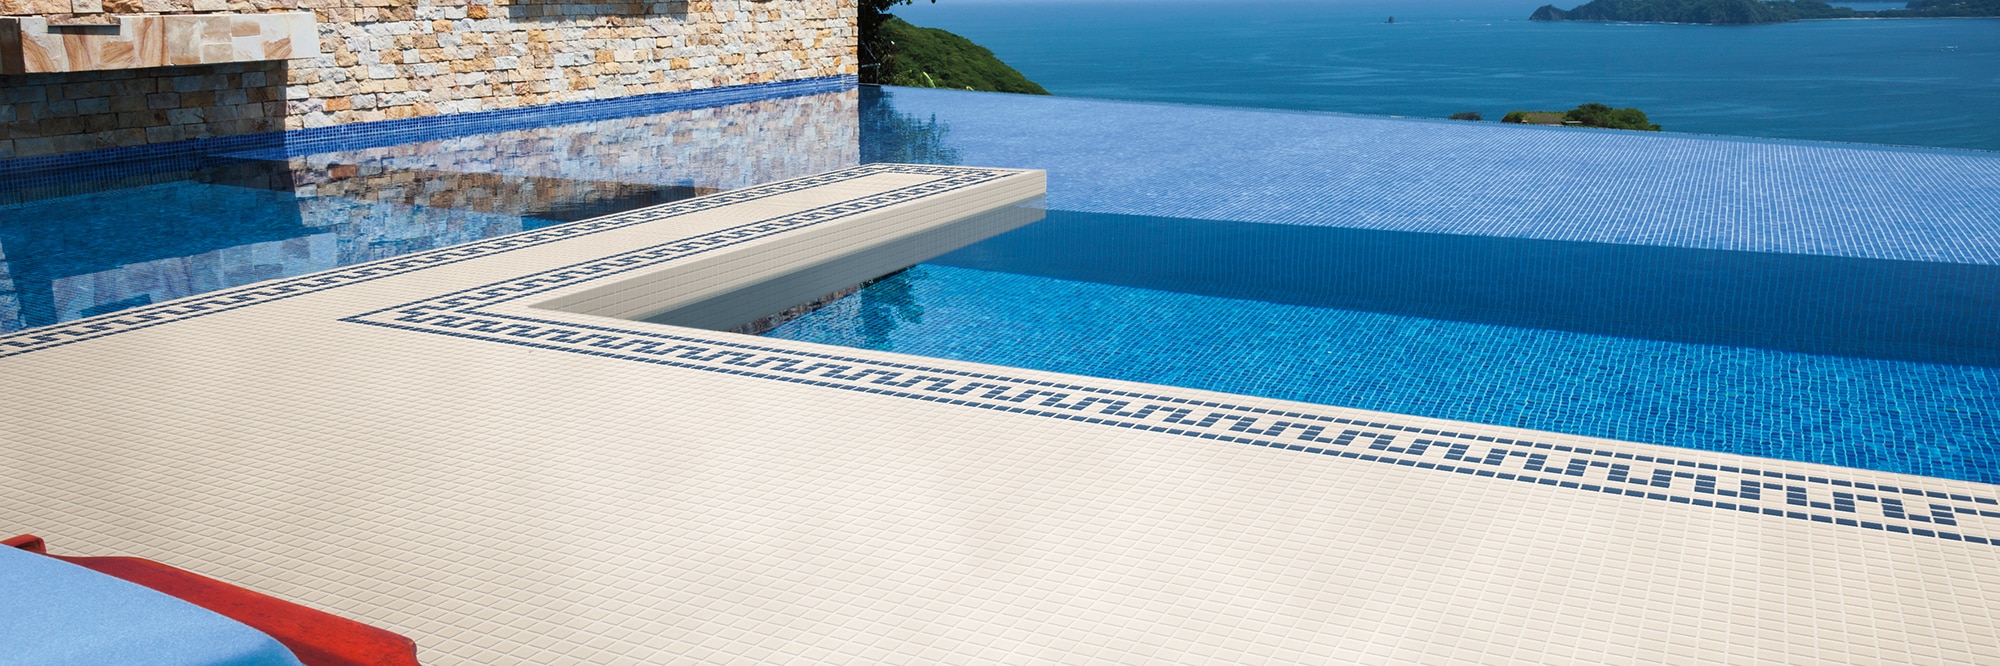 Infinity pool with blue submerged tile, white tile deck with blue border design, and stunning view of the ocean.